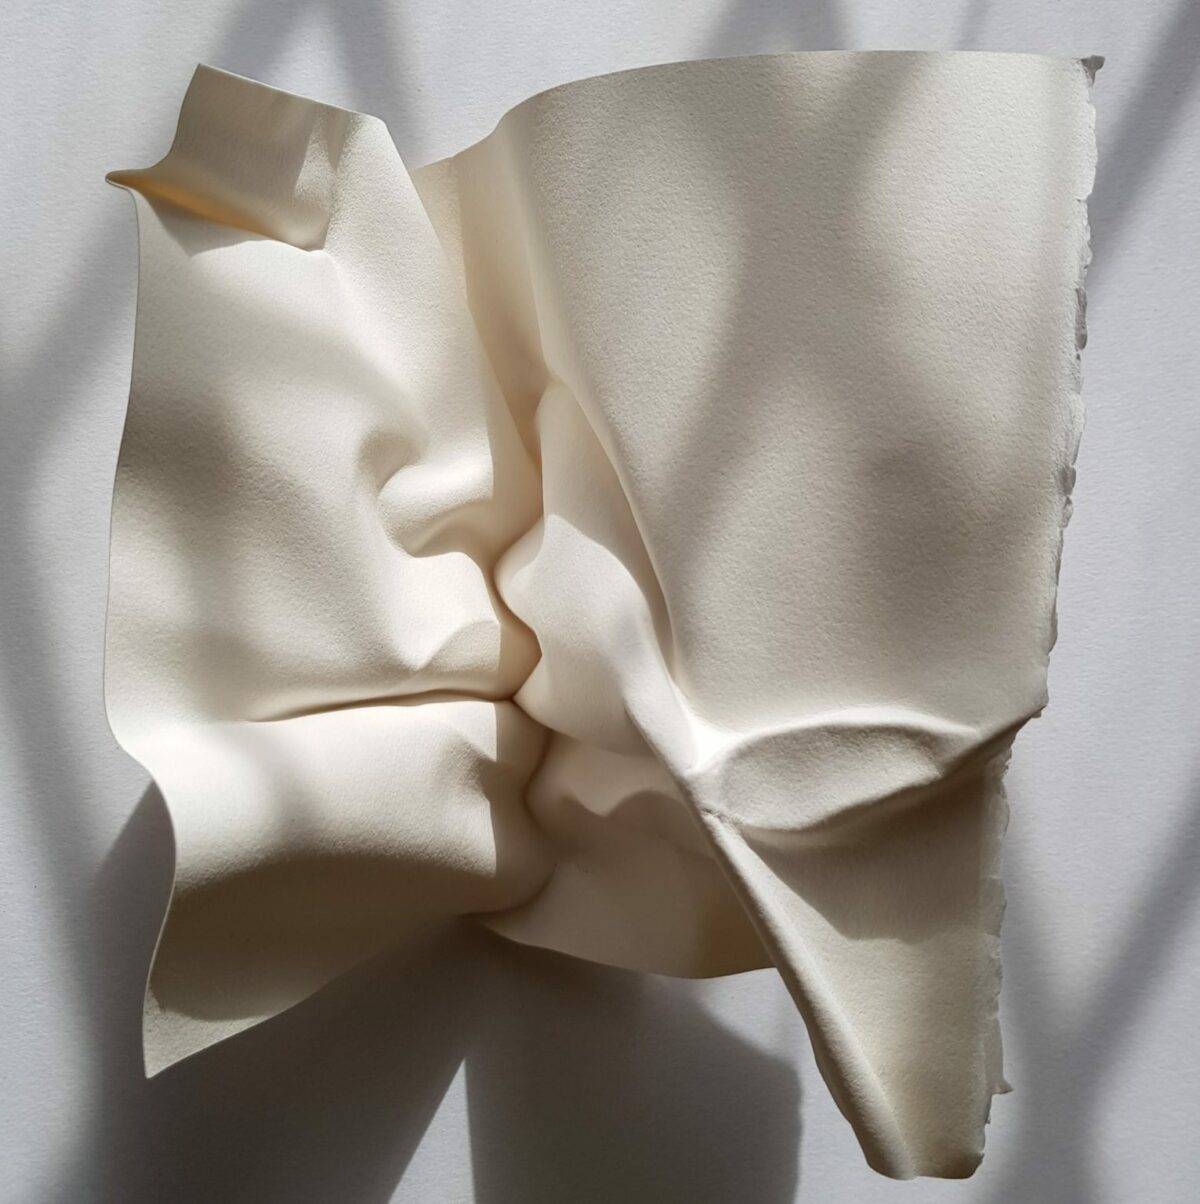 Fascinating Facial Sculptures Made From Folded Paper Sheets By Polly Verity (16)